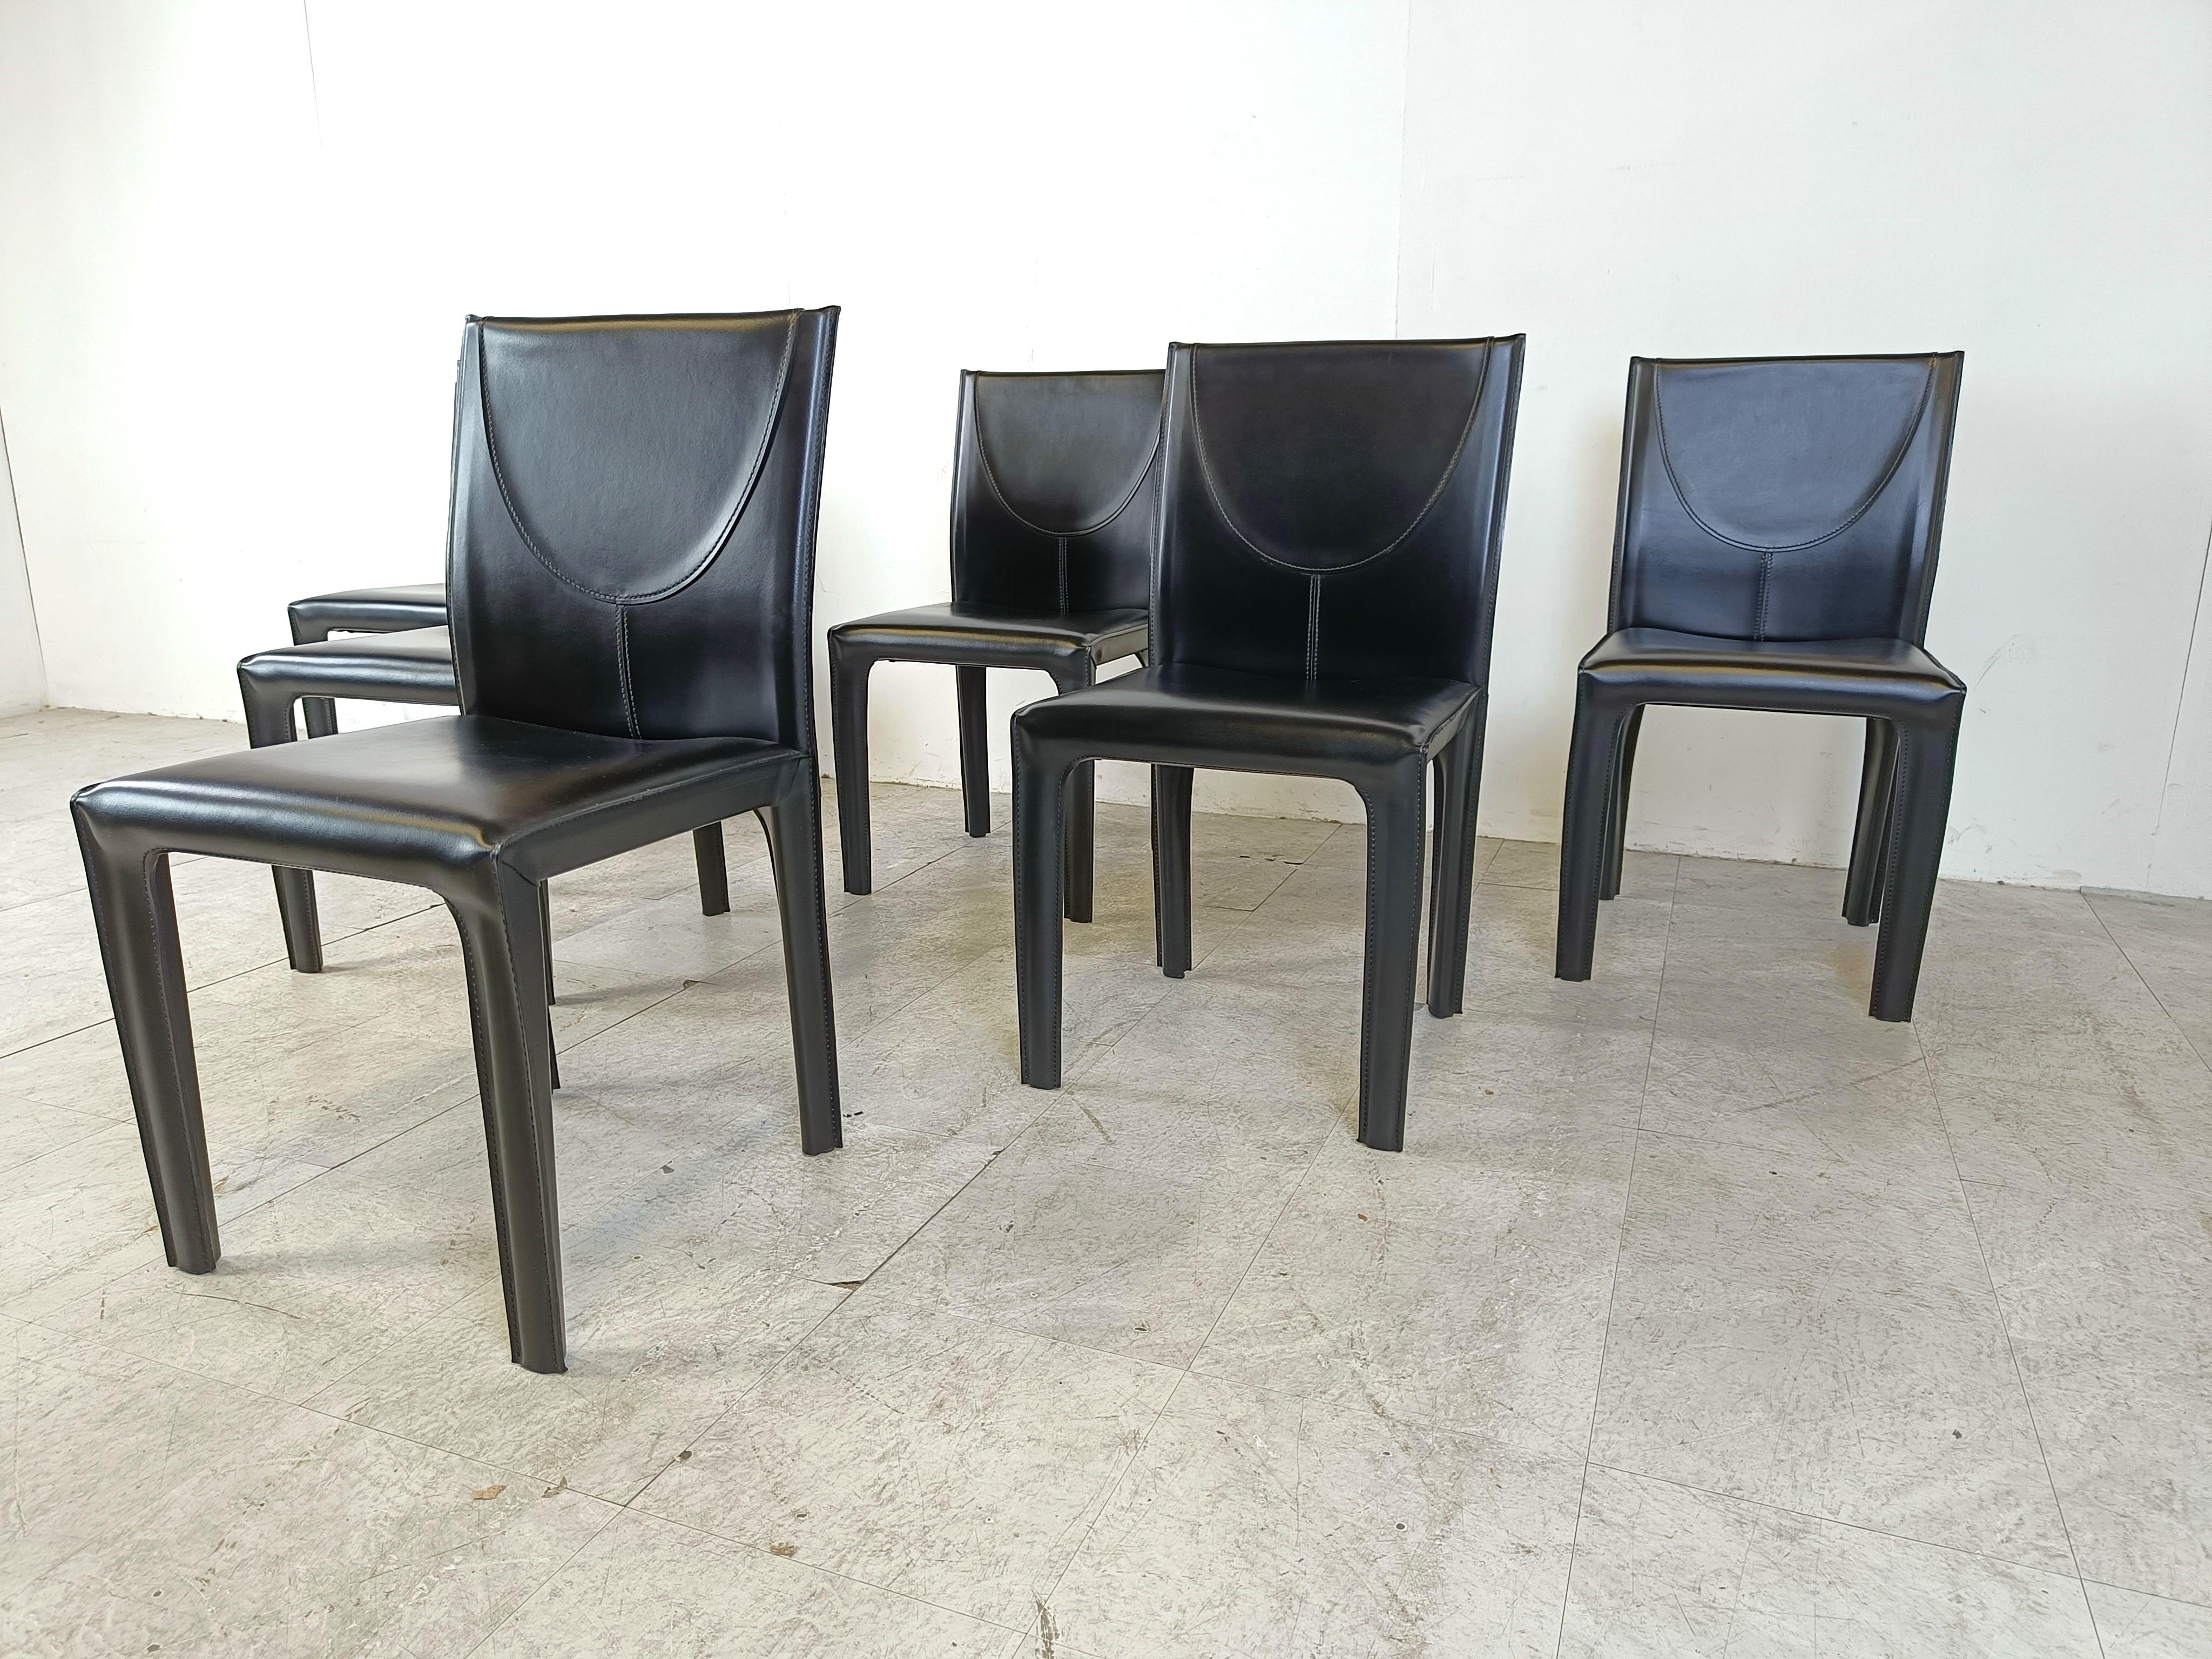 Late 20th Century Black leather dining chairs by Arper italy, 1980s - set of 6